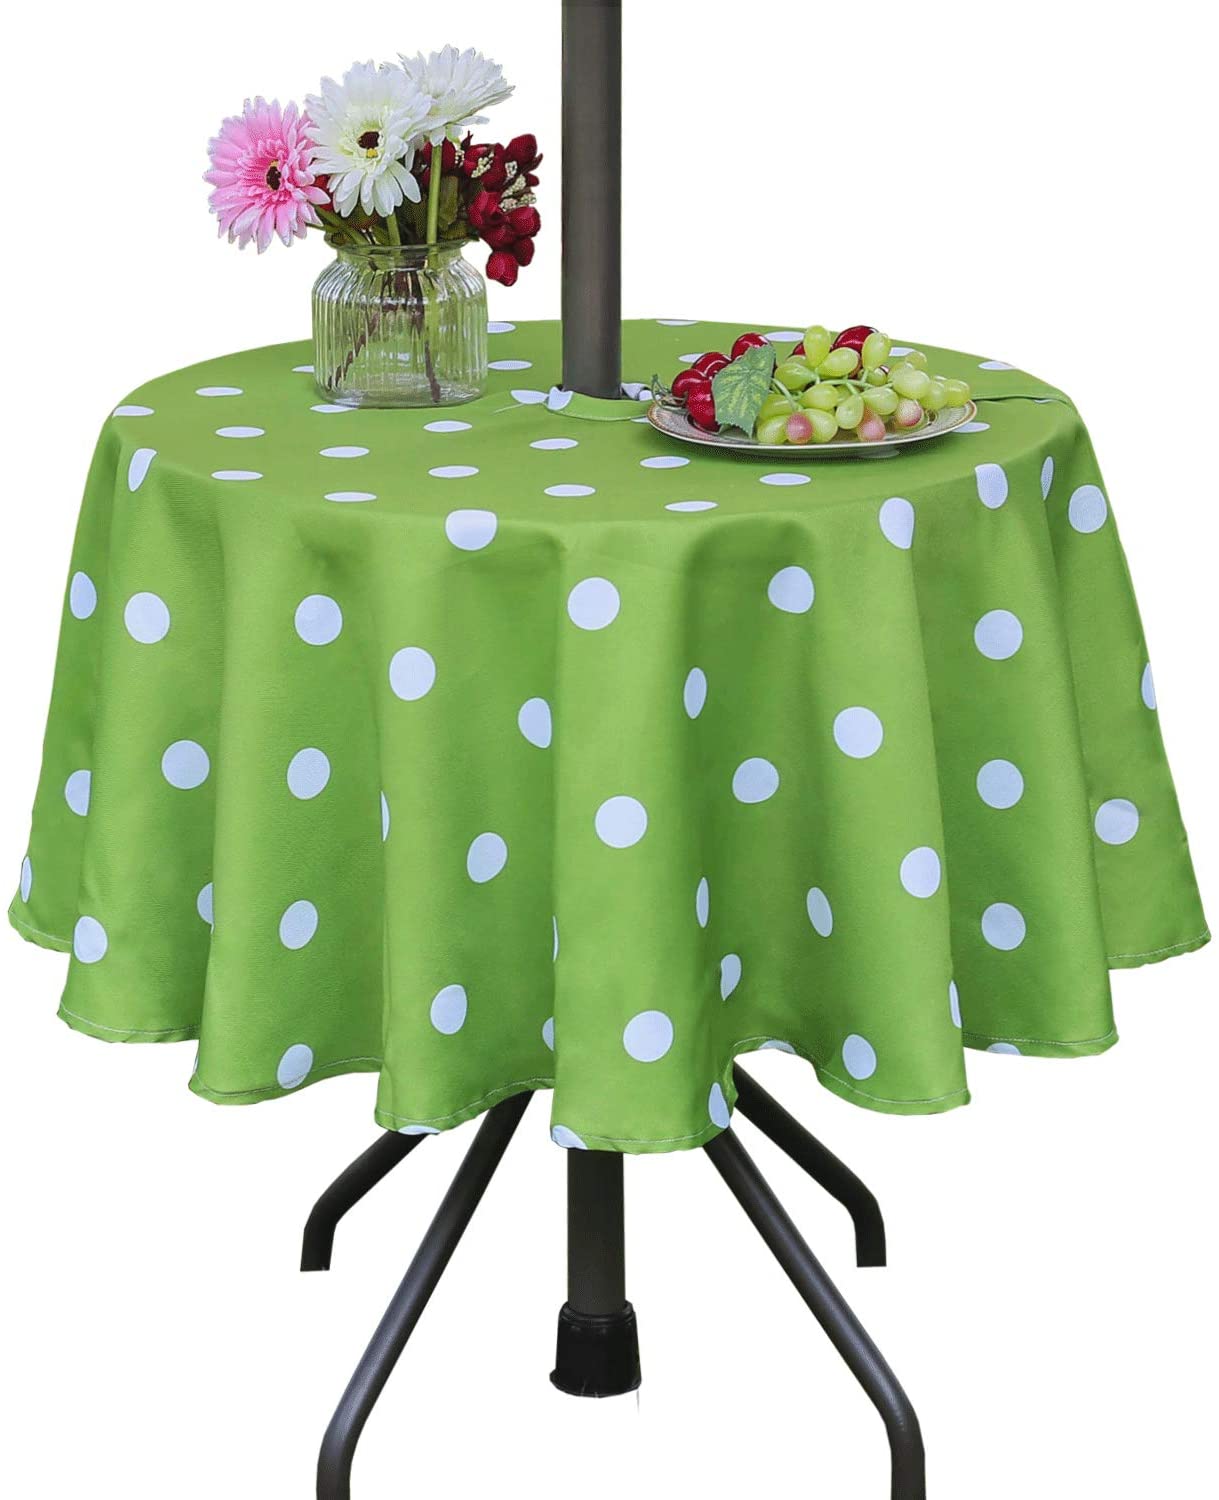 Poise3EHome Wrinkle-Resistant Round Tablecloth With Umbrella Hole